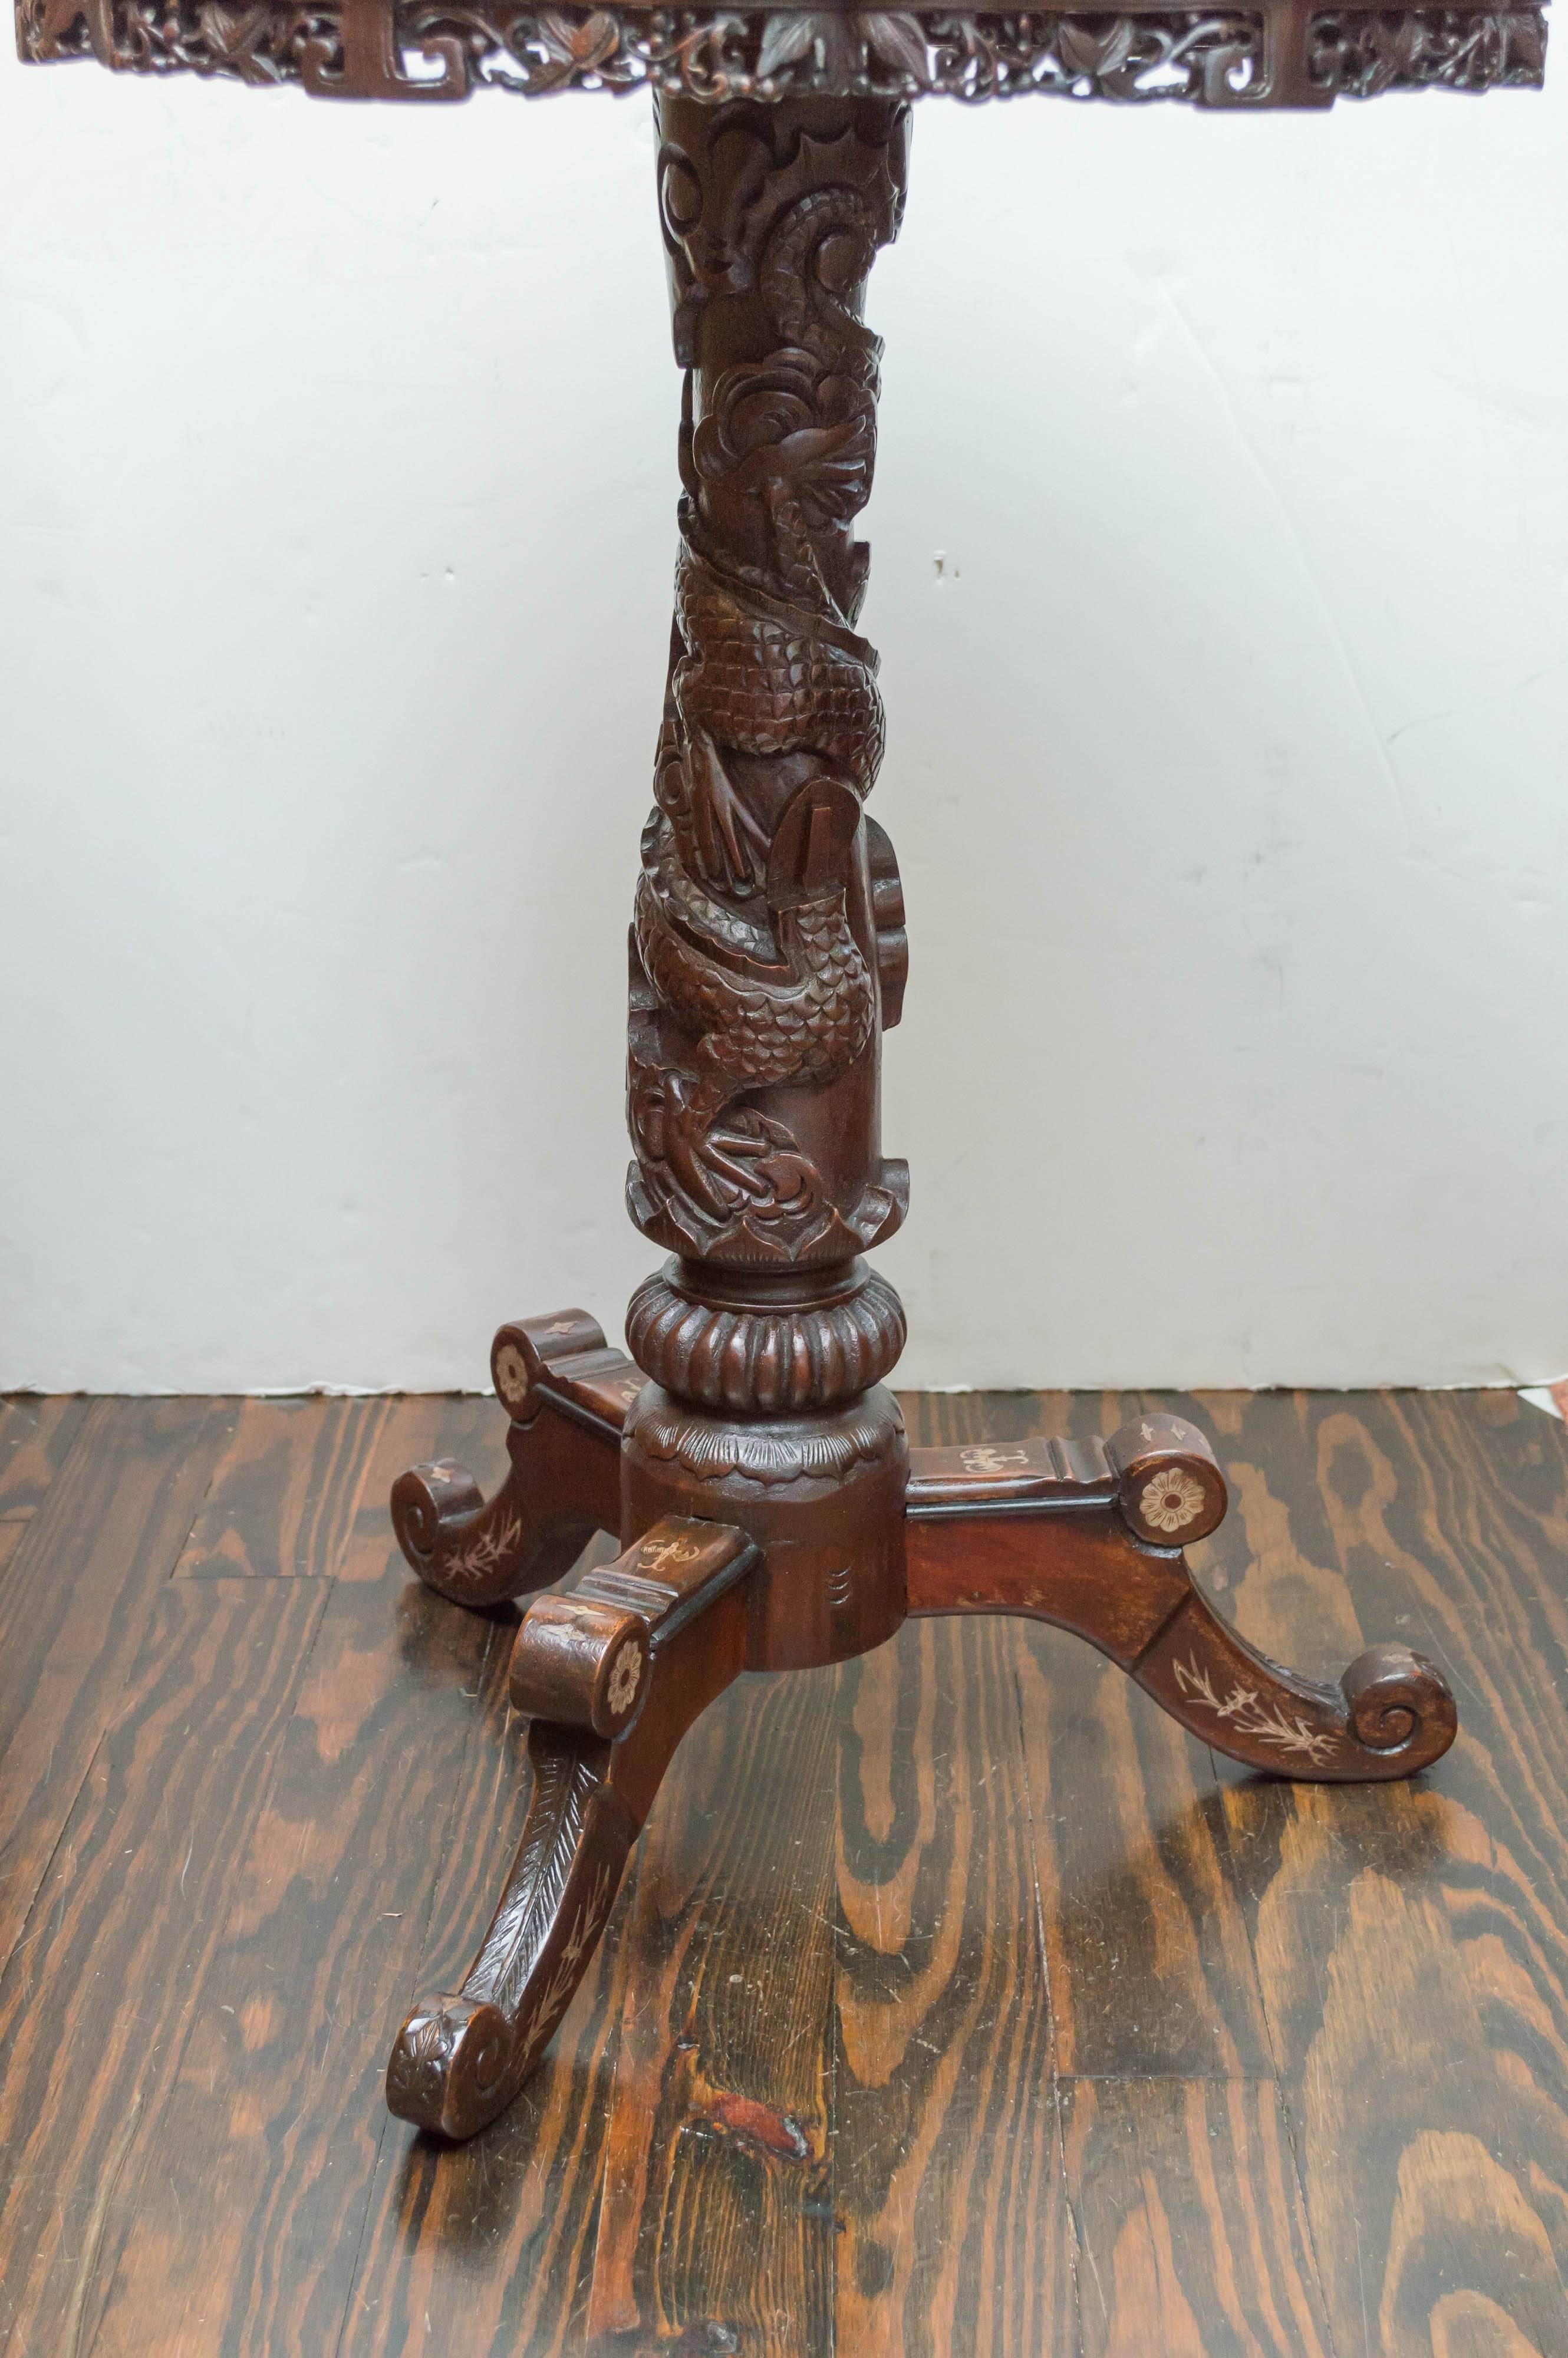 19th century Anglo-Chinese carved teak and inlaid stand, circa 1880
From the China Trade, clipper ship, period. Very in vogue and exotic decor popular in Europe and America in the late 19th century. Ornately carved and inlaid decoration. Boxwood